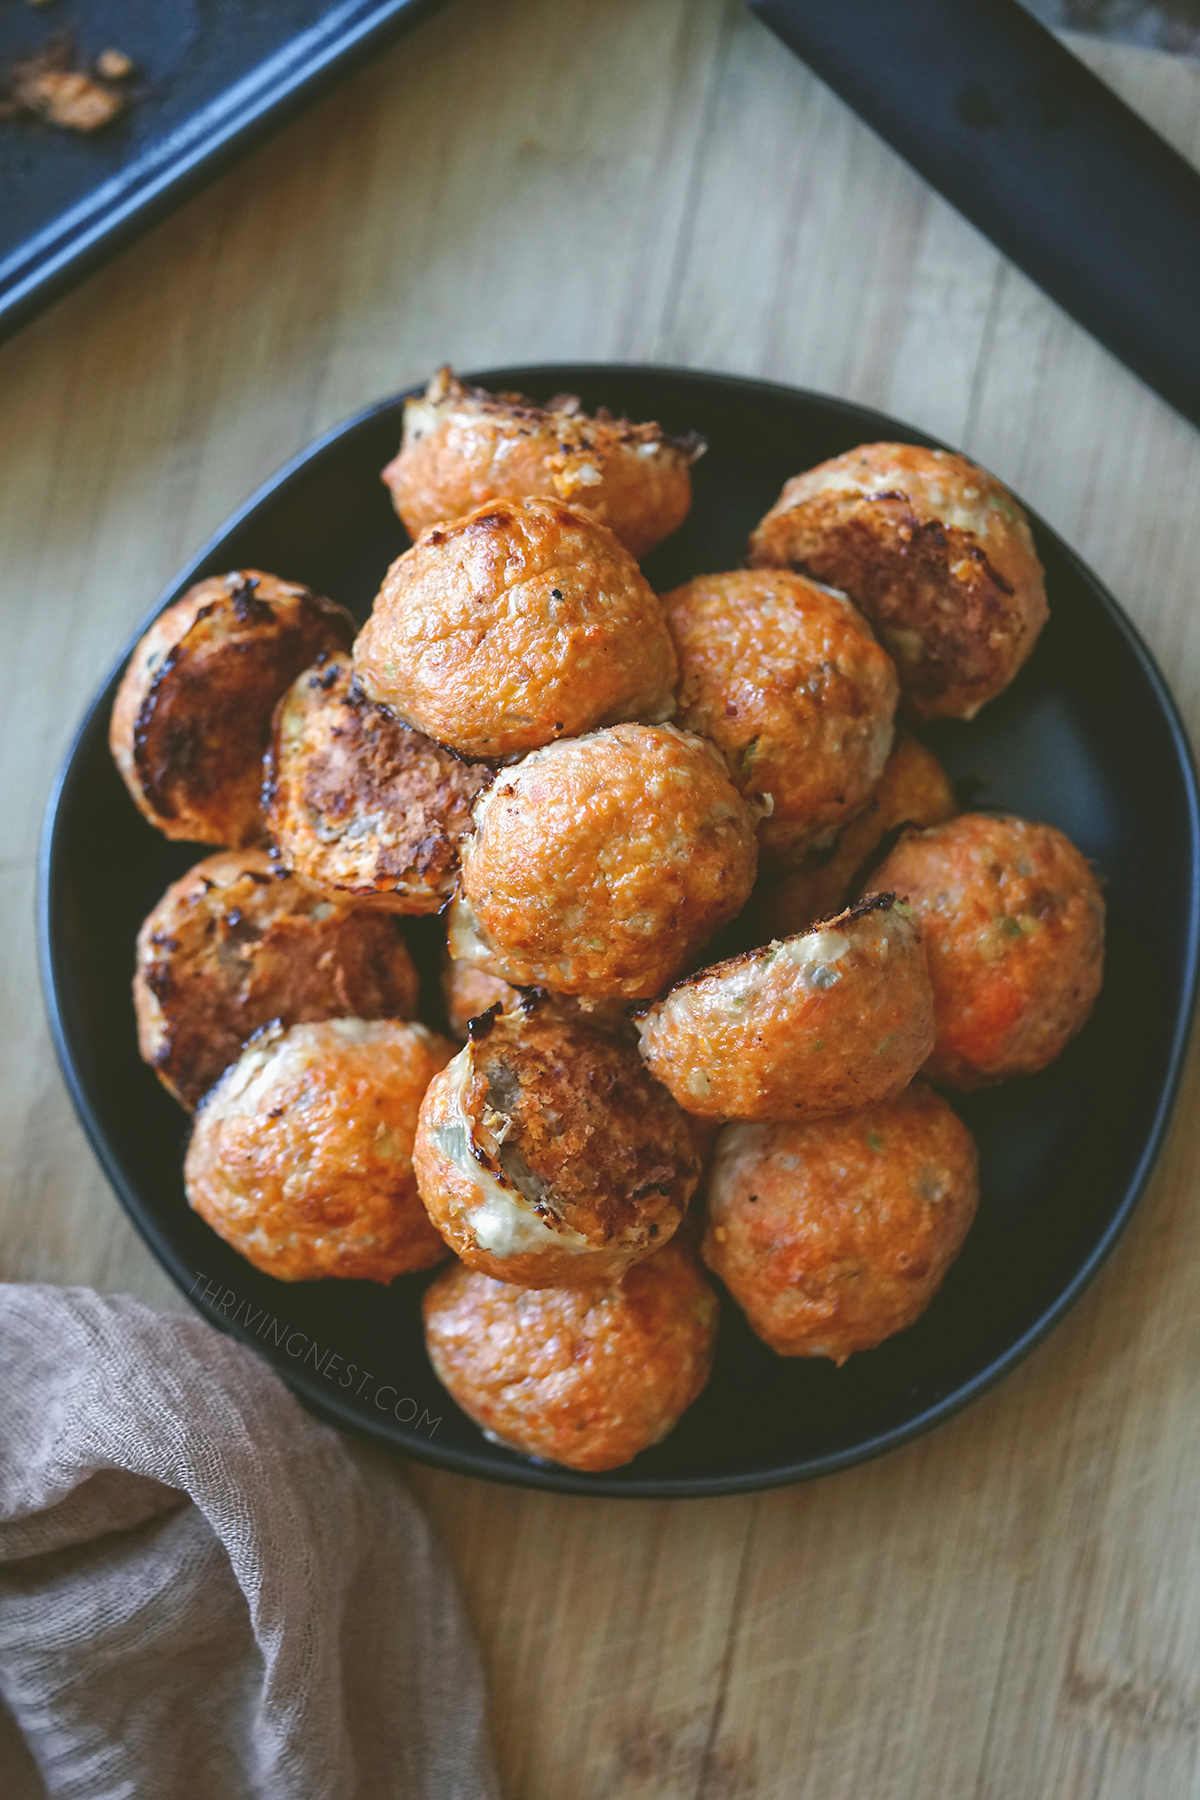 Salmon baby meatballs - perfect salmon recipe as finger food or baby led weaning.